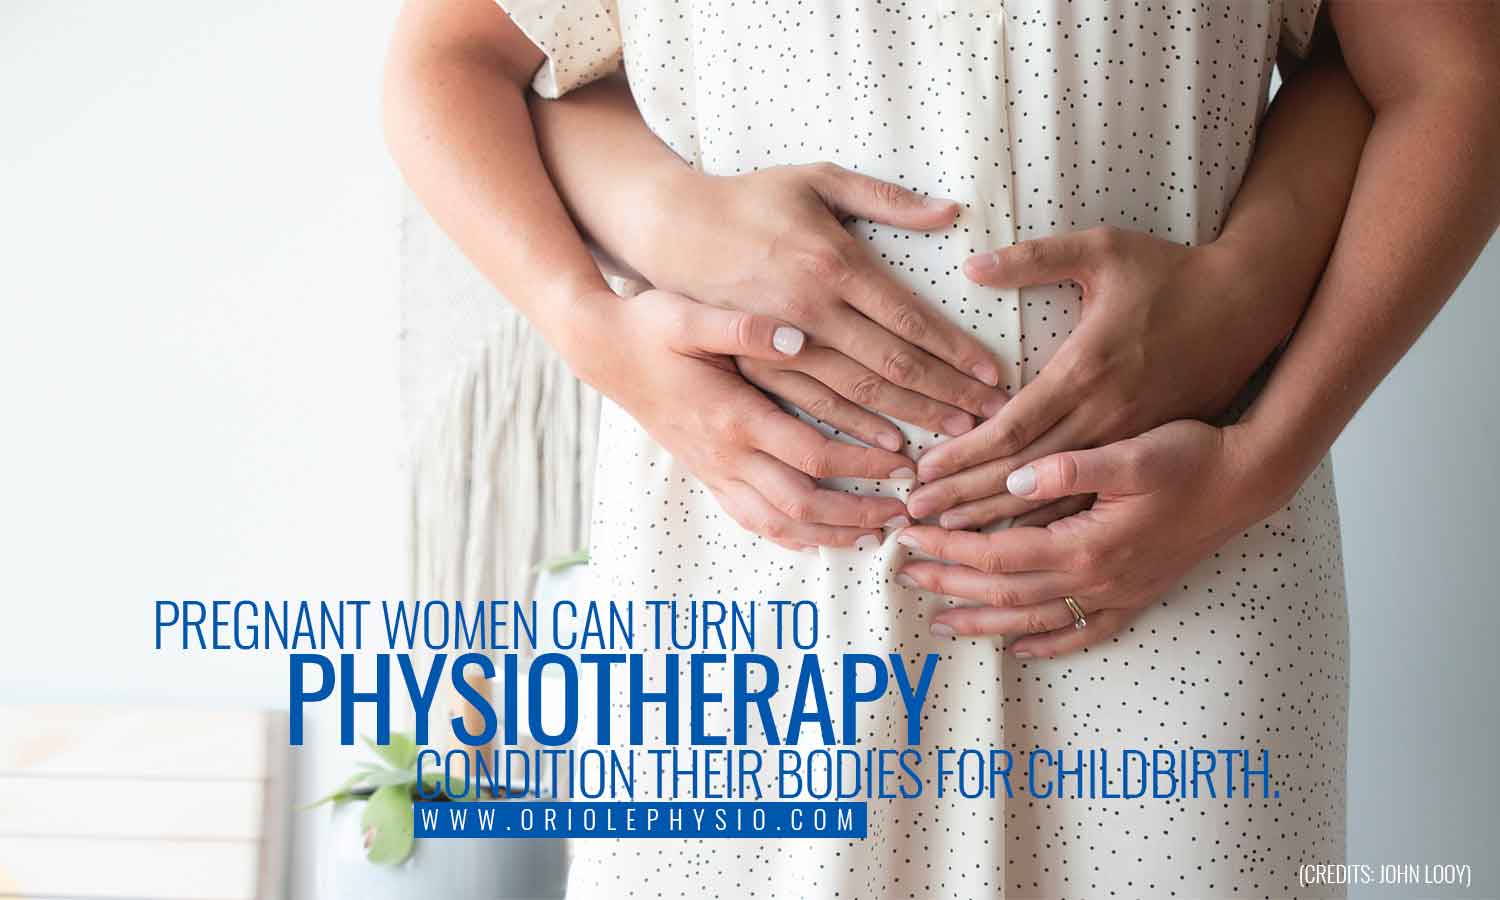 Pregnant women can turn to physiotherapy condition their bodies for childbirth.